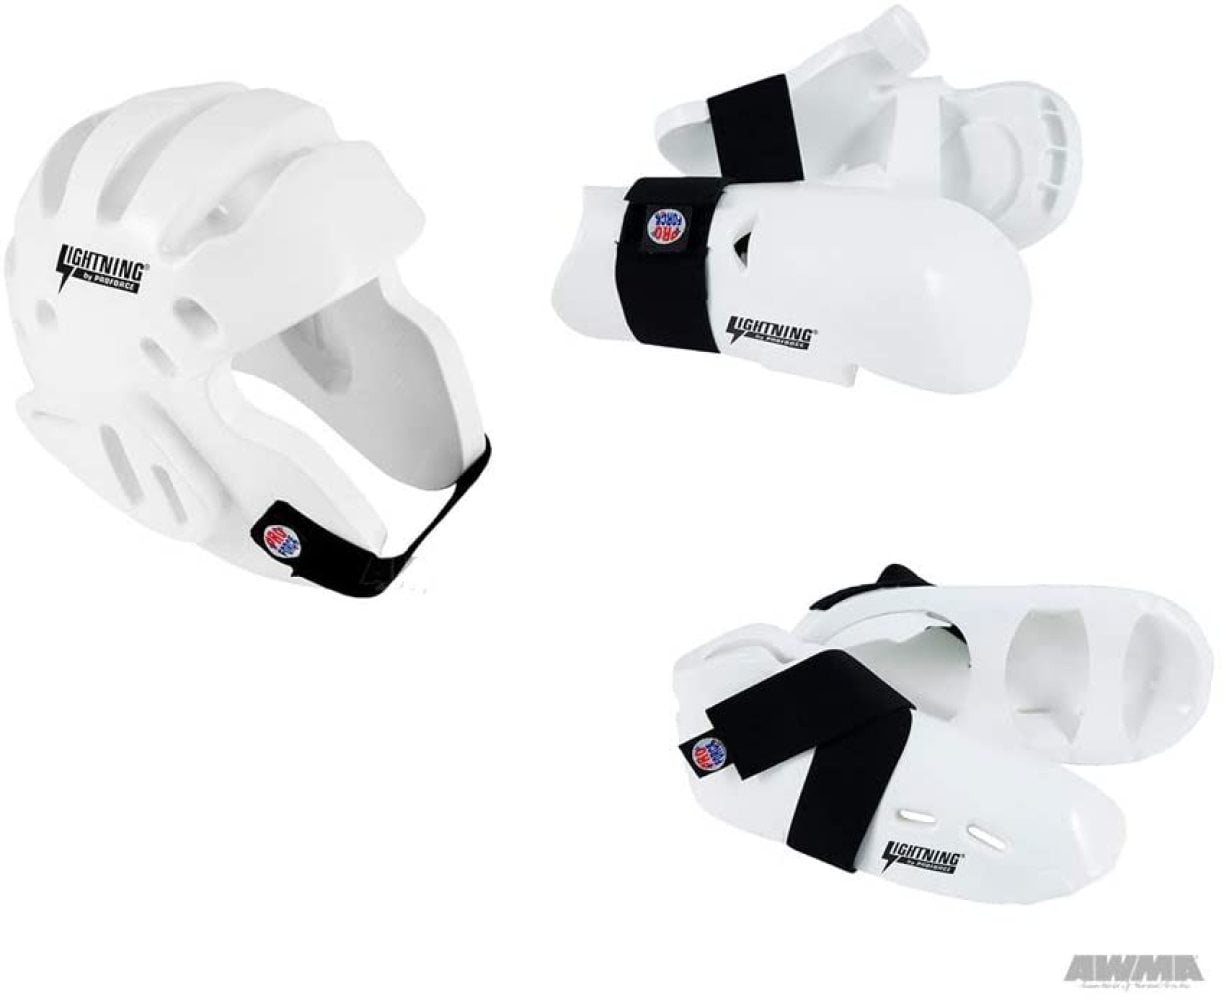 Lightning White Karate Sparring Gear Package Deal Size Adult Medium 